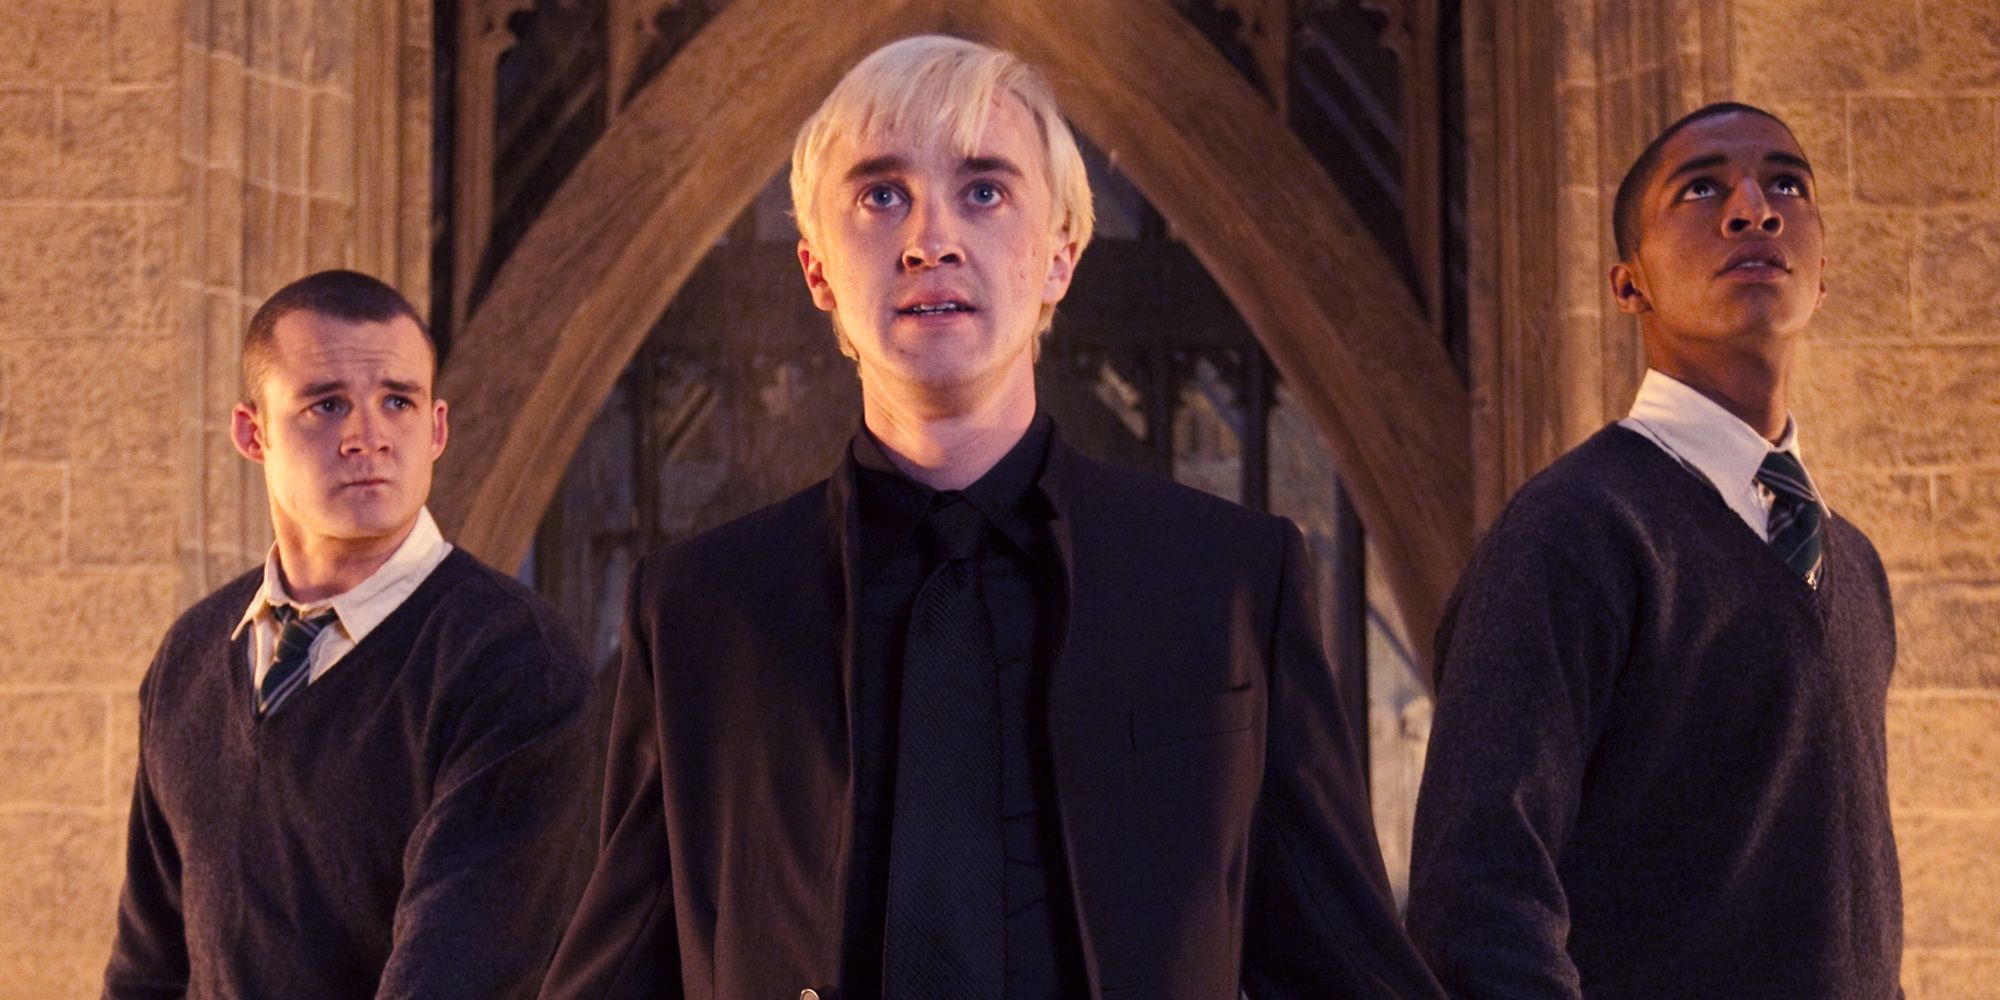 Draco Malfoy stands with Goyle and Blaise in Harry Potter and the Deathly Hallows